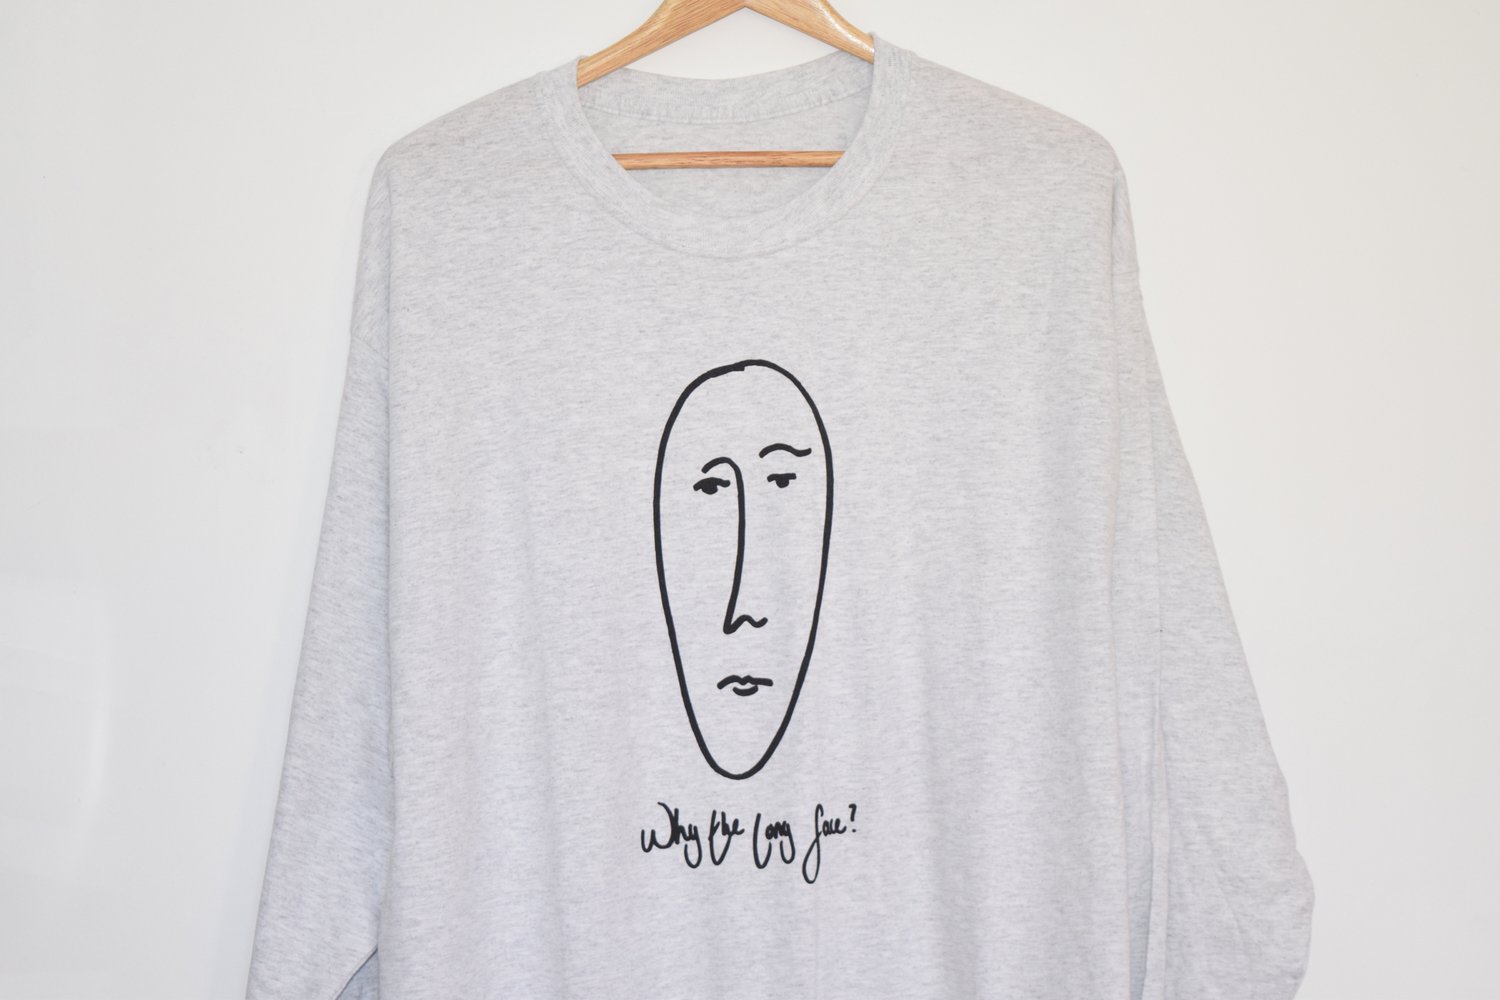 Image of Long Sleeve Why The Long Face Tee in grey